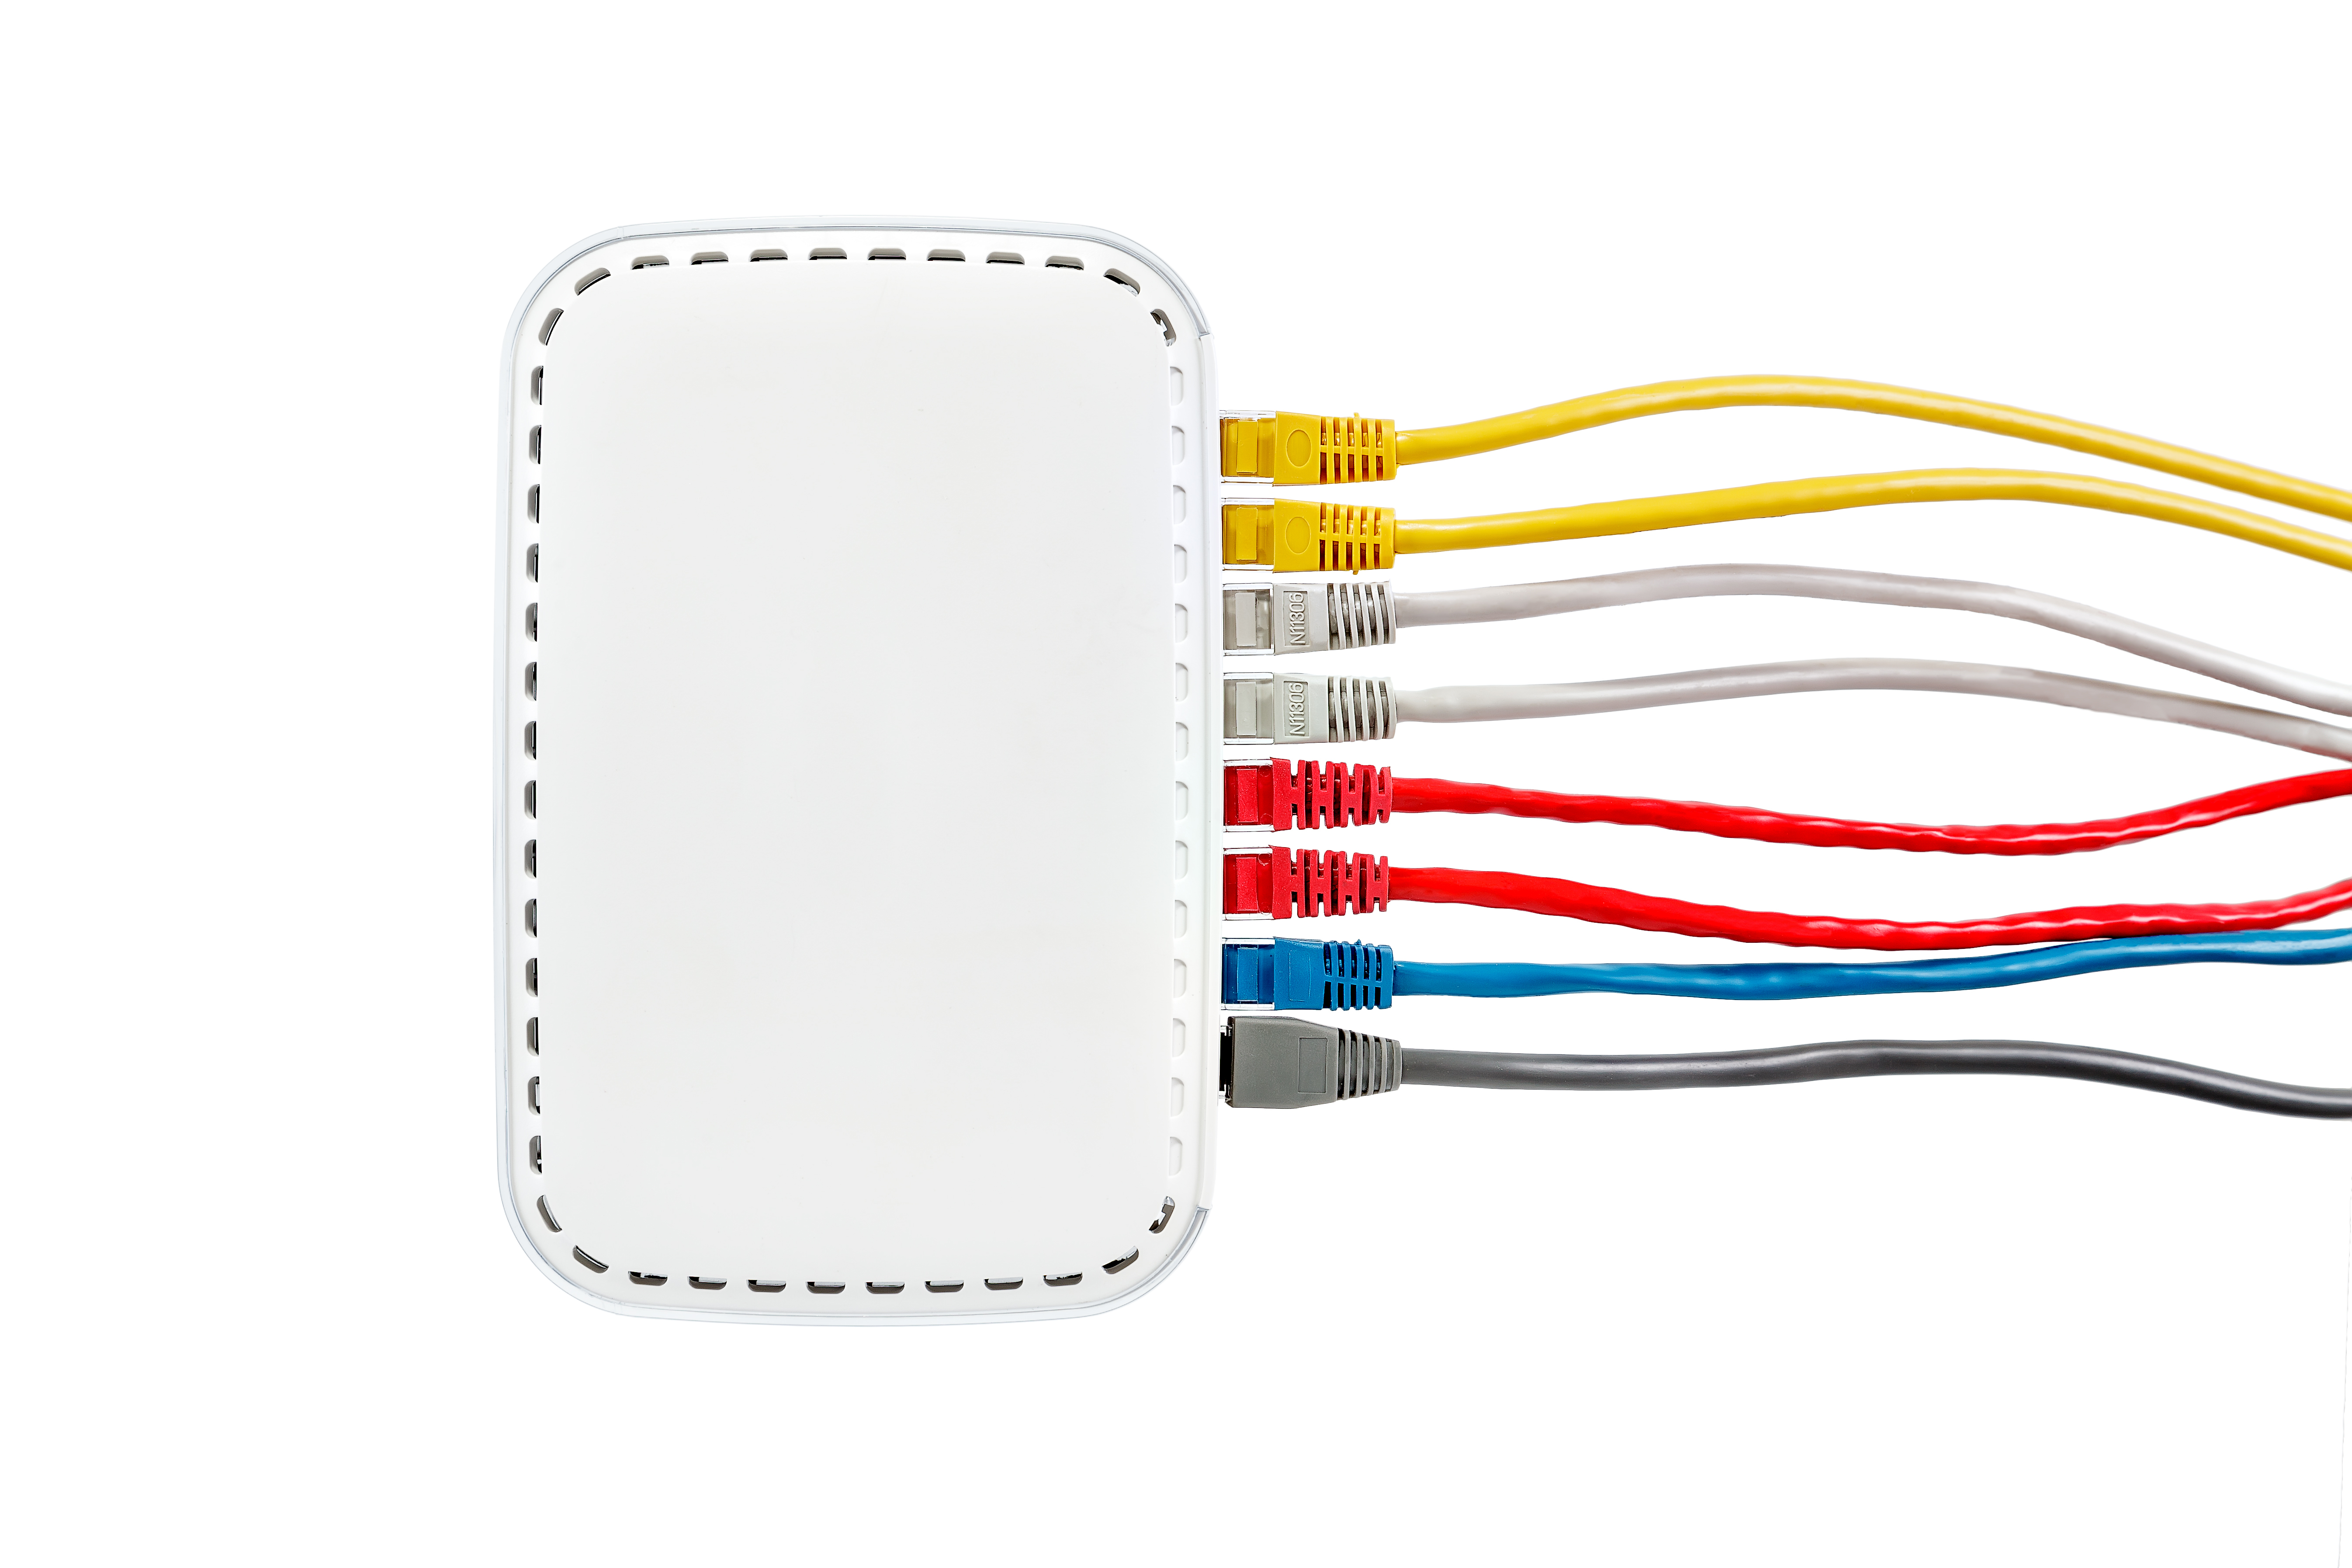 Multicolored network cables connected to router on a white background_Side view_Red, yellow, blue, gray and white Ethernet cables